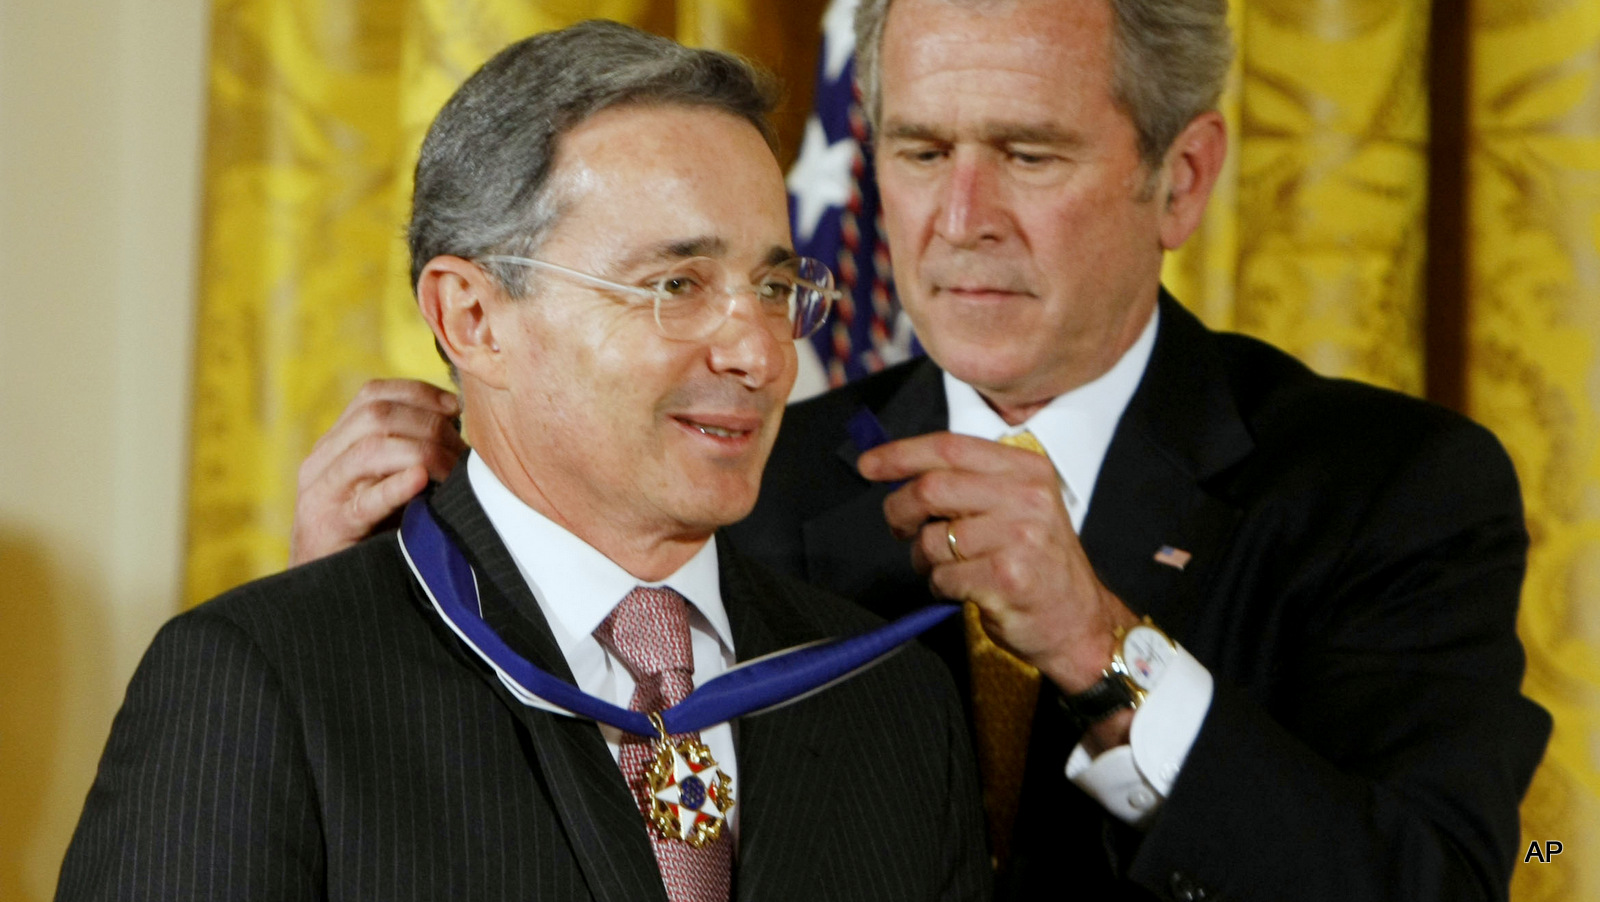 President George W. Bush presents the Presidential Medal of Freedom to Colombian President Alvaro Uribe, Tuesday, Jan. 13, 2009, during a ceremony in the East Room of the White House in Washington.